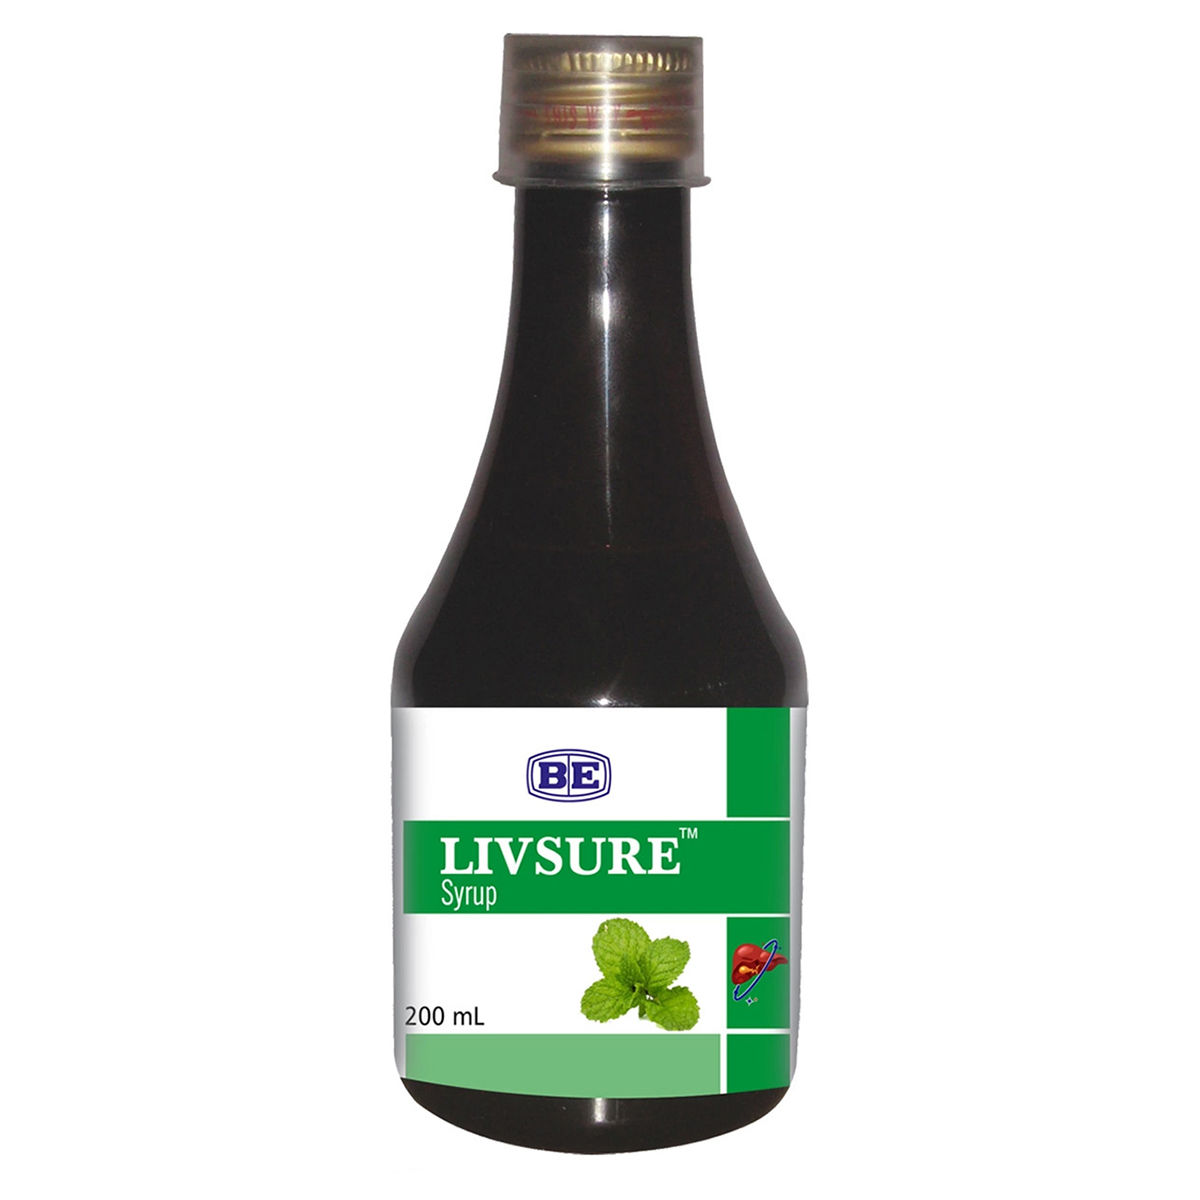 Buy Livsure Syrup, 200 ml Online